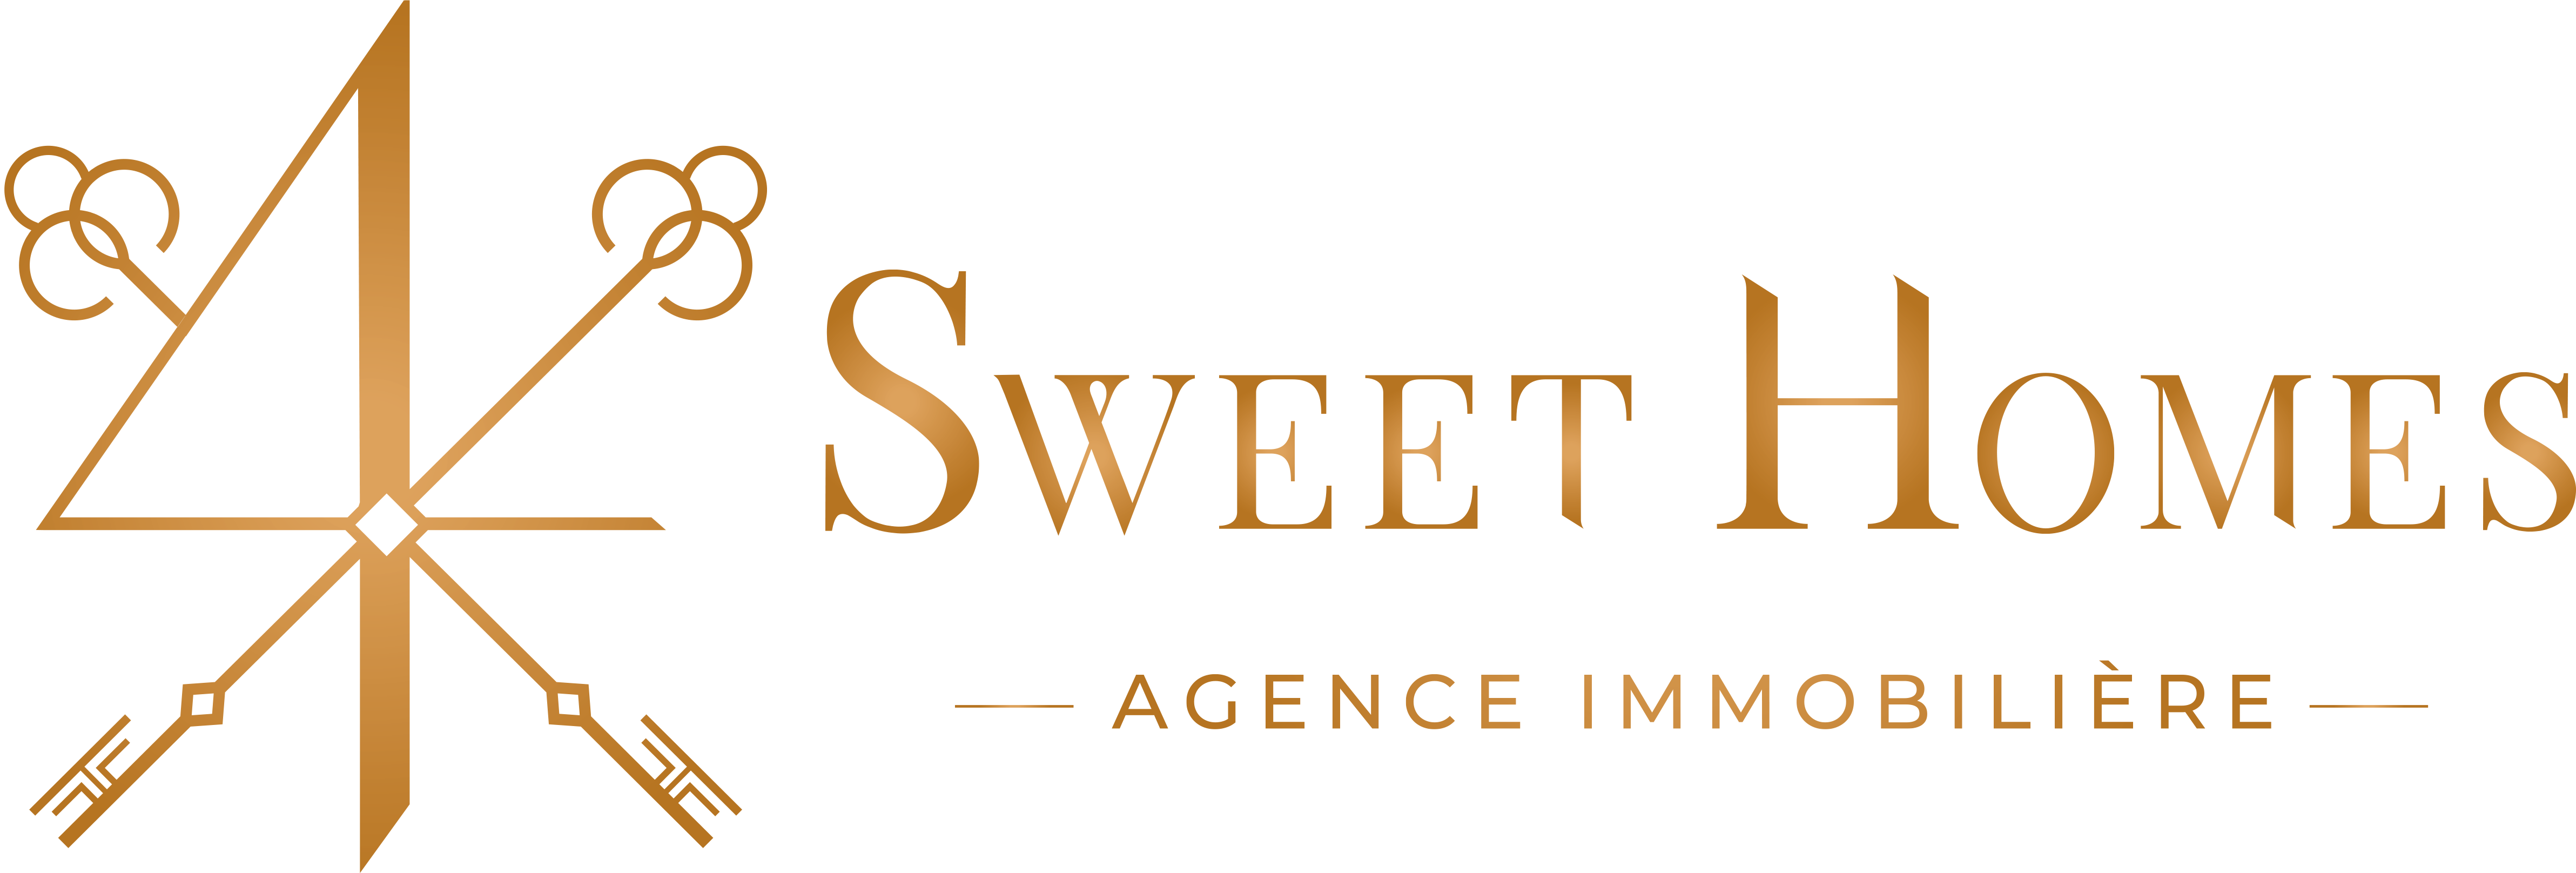 4 Sweet Homes | Agence immobilière